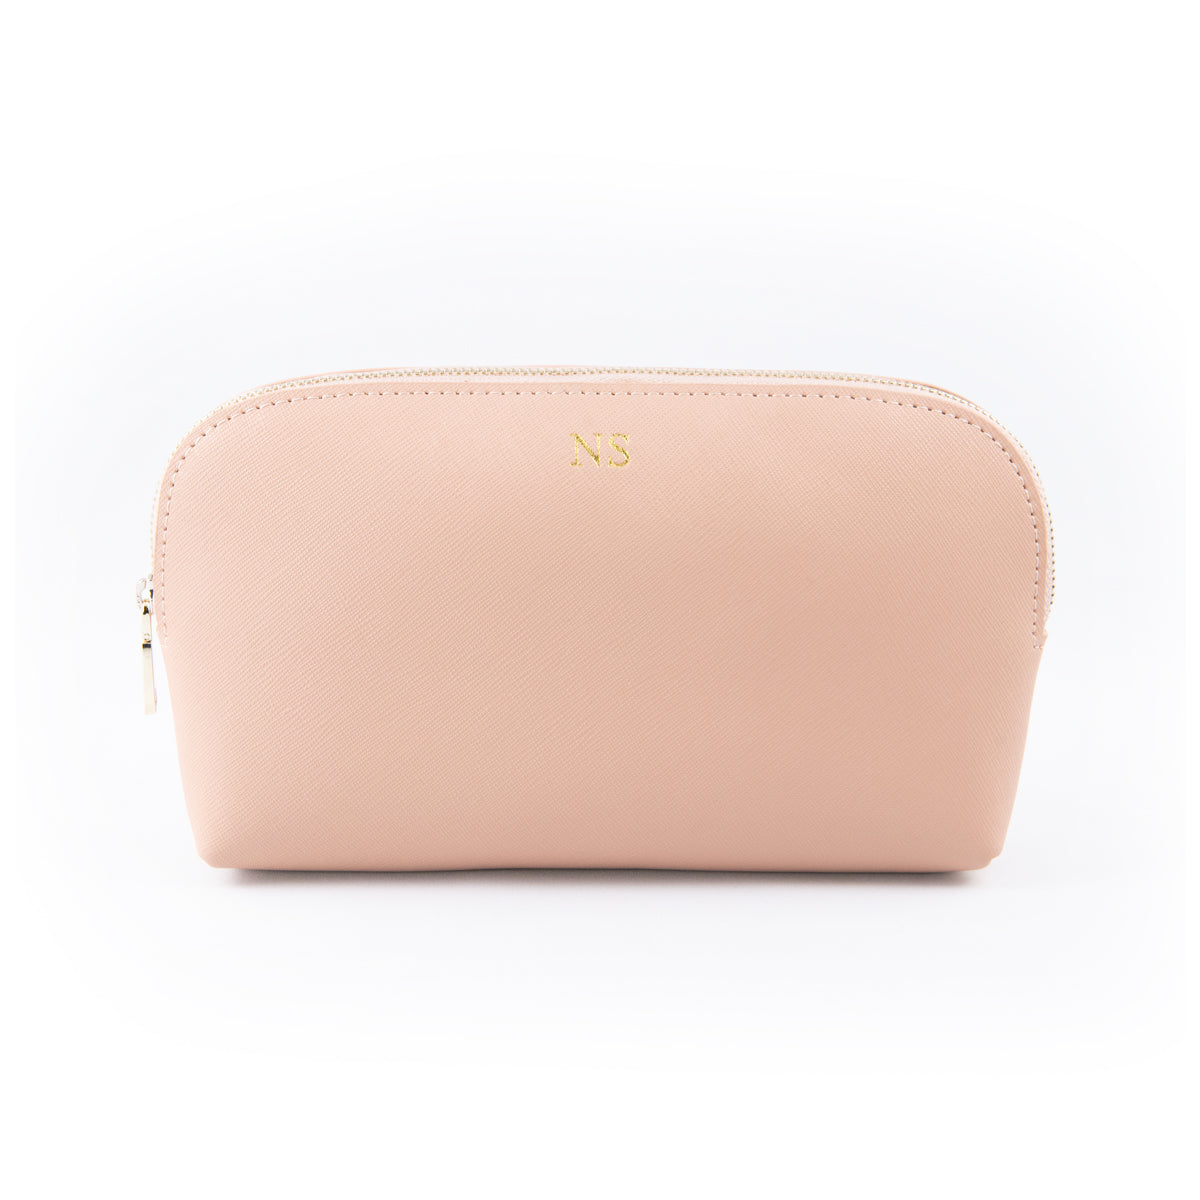 Personalised Nude Saffiano Leather Makeup Bag